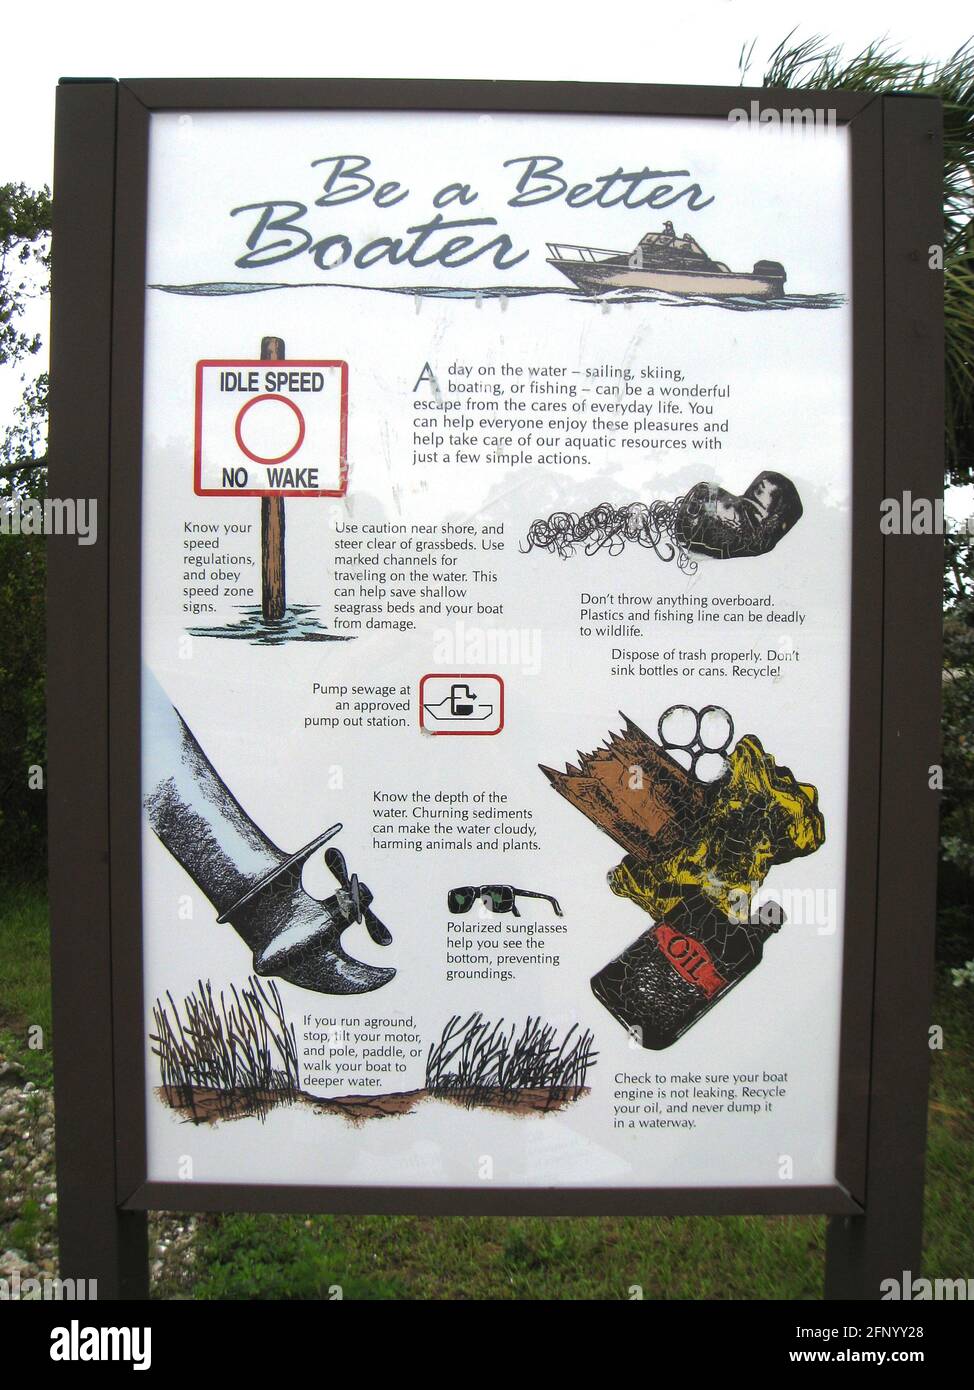 A "Be A Better Boater" sign next to a public boat ramp in Florida, USA, lists ways for recreational boaters to enjoy their time on the water and also protect aquatic resources. Stock Photo